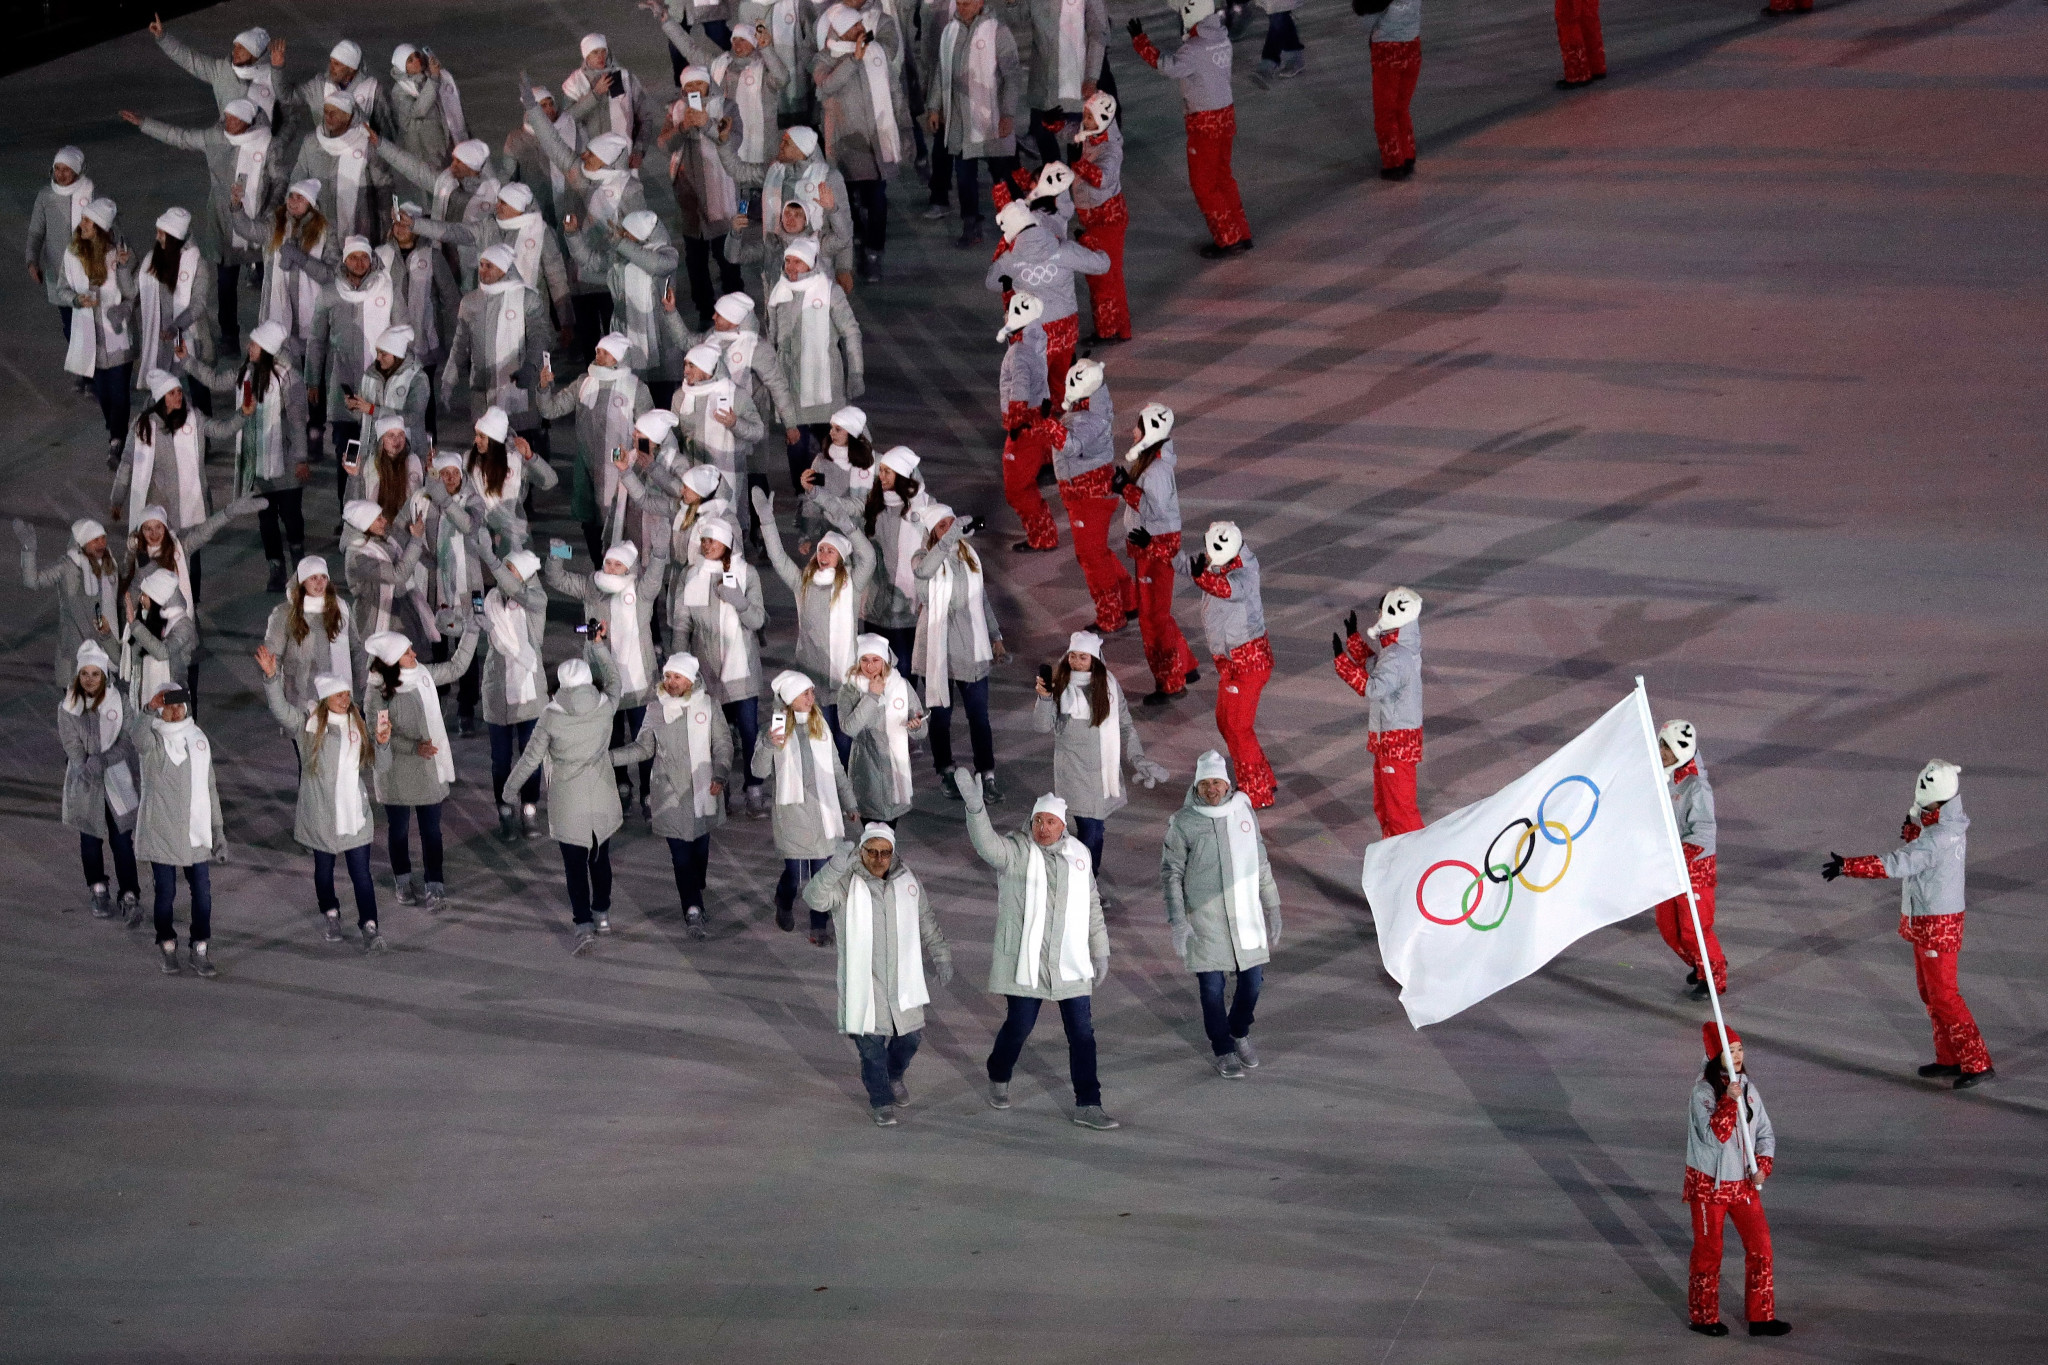 Russian athletes marched under the Olympic flag at the Opening Ceremony of Pyeongchang 2018, but had been hoping to participate under their own flag at the Closing Ceremony ©Getty Images